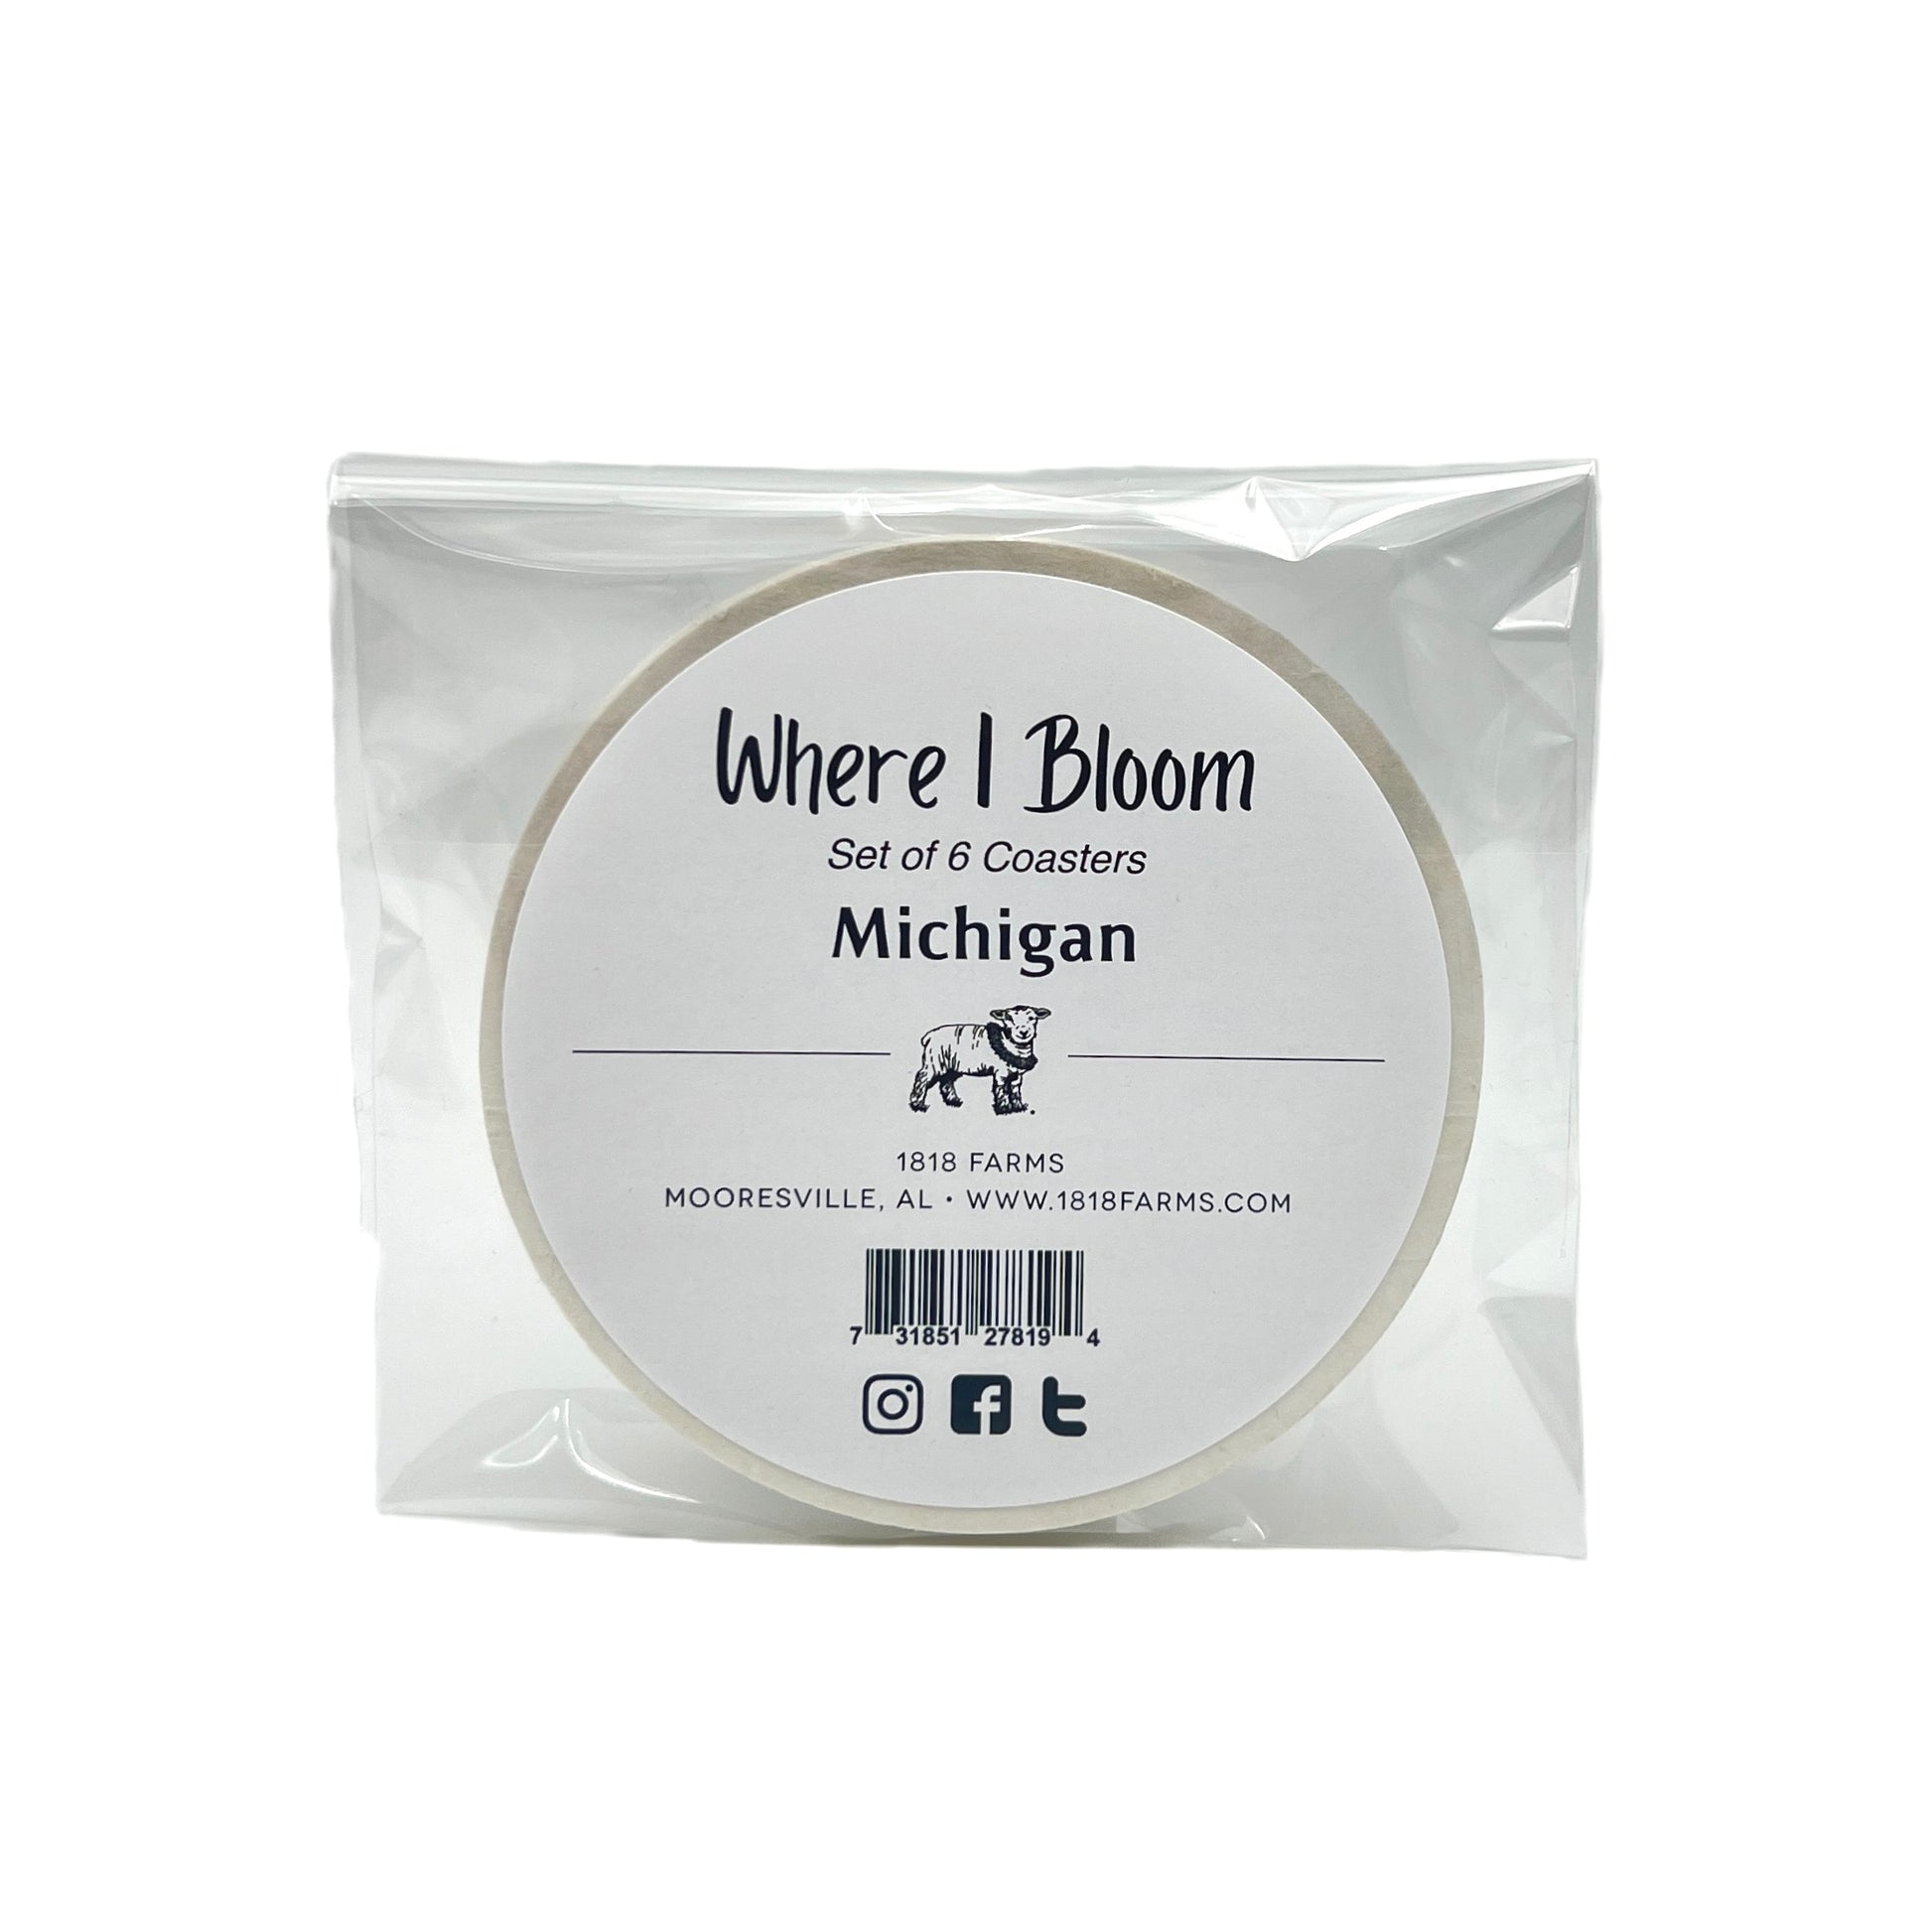 Michigan Themed Coasters (Set of 6)  - "Where I Bloom" Collection Coaster 1818 Farms   